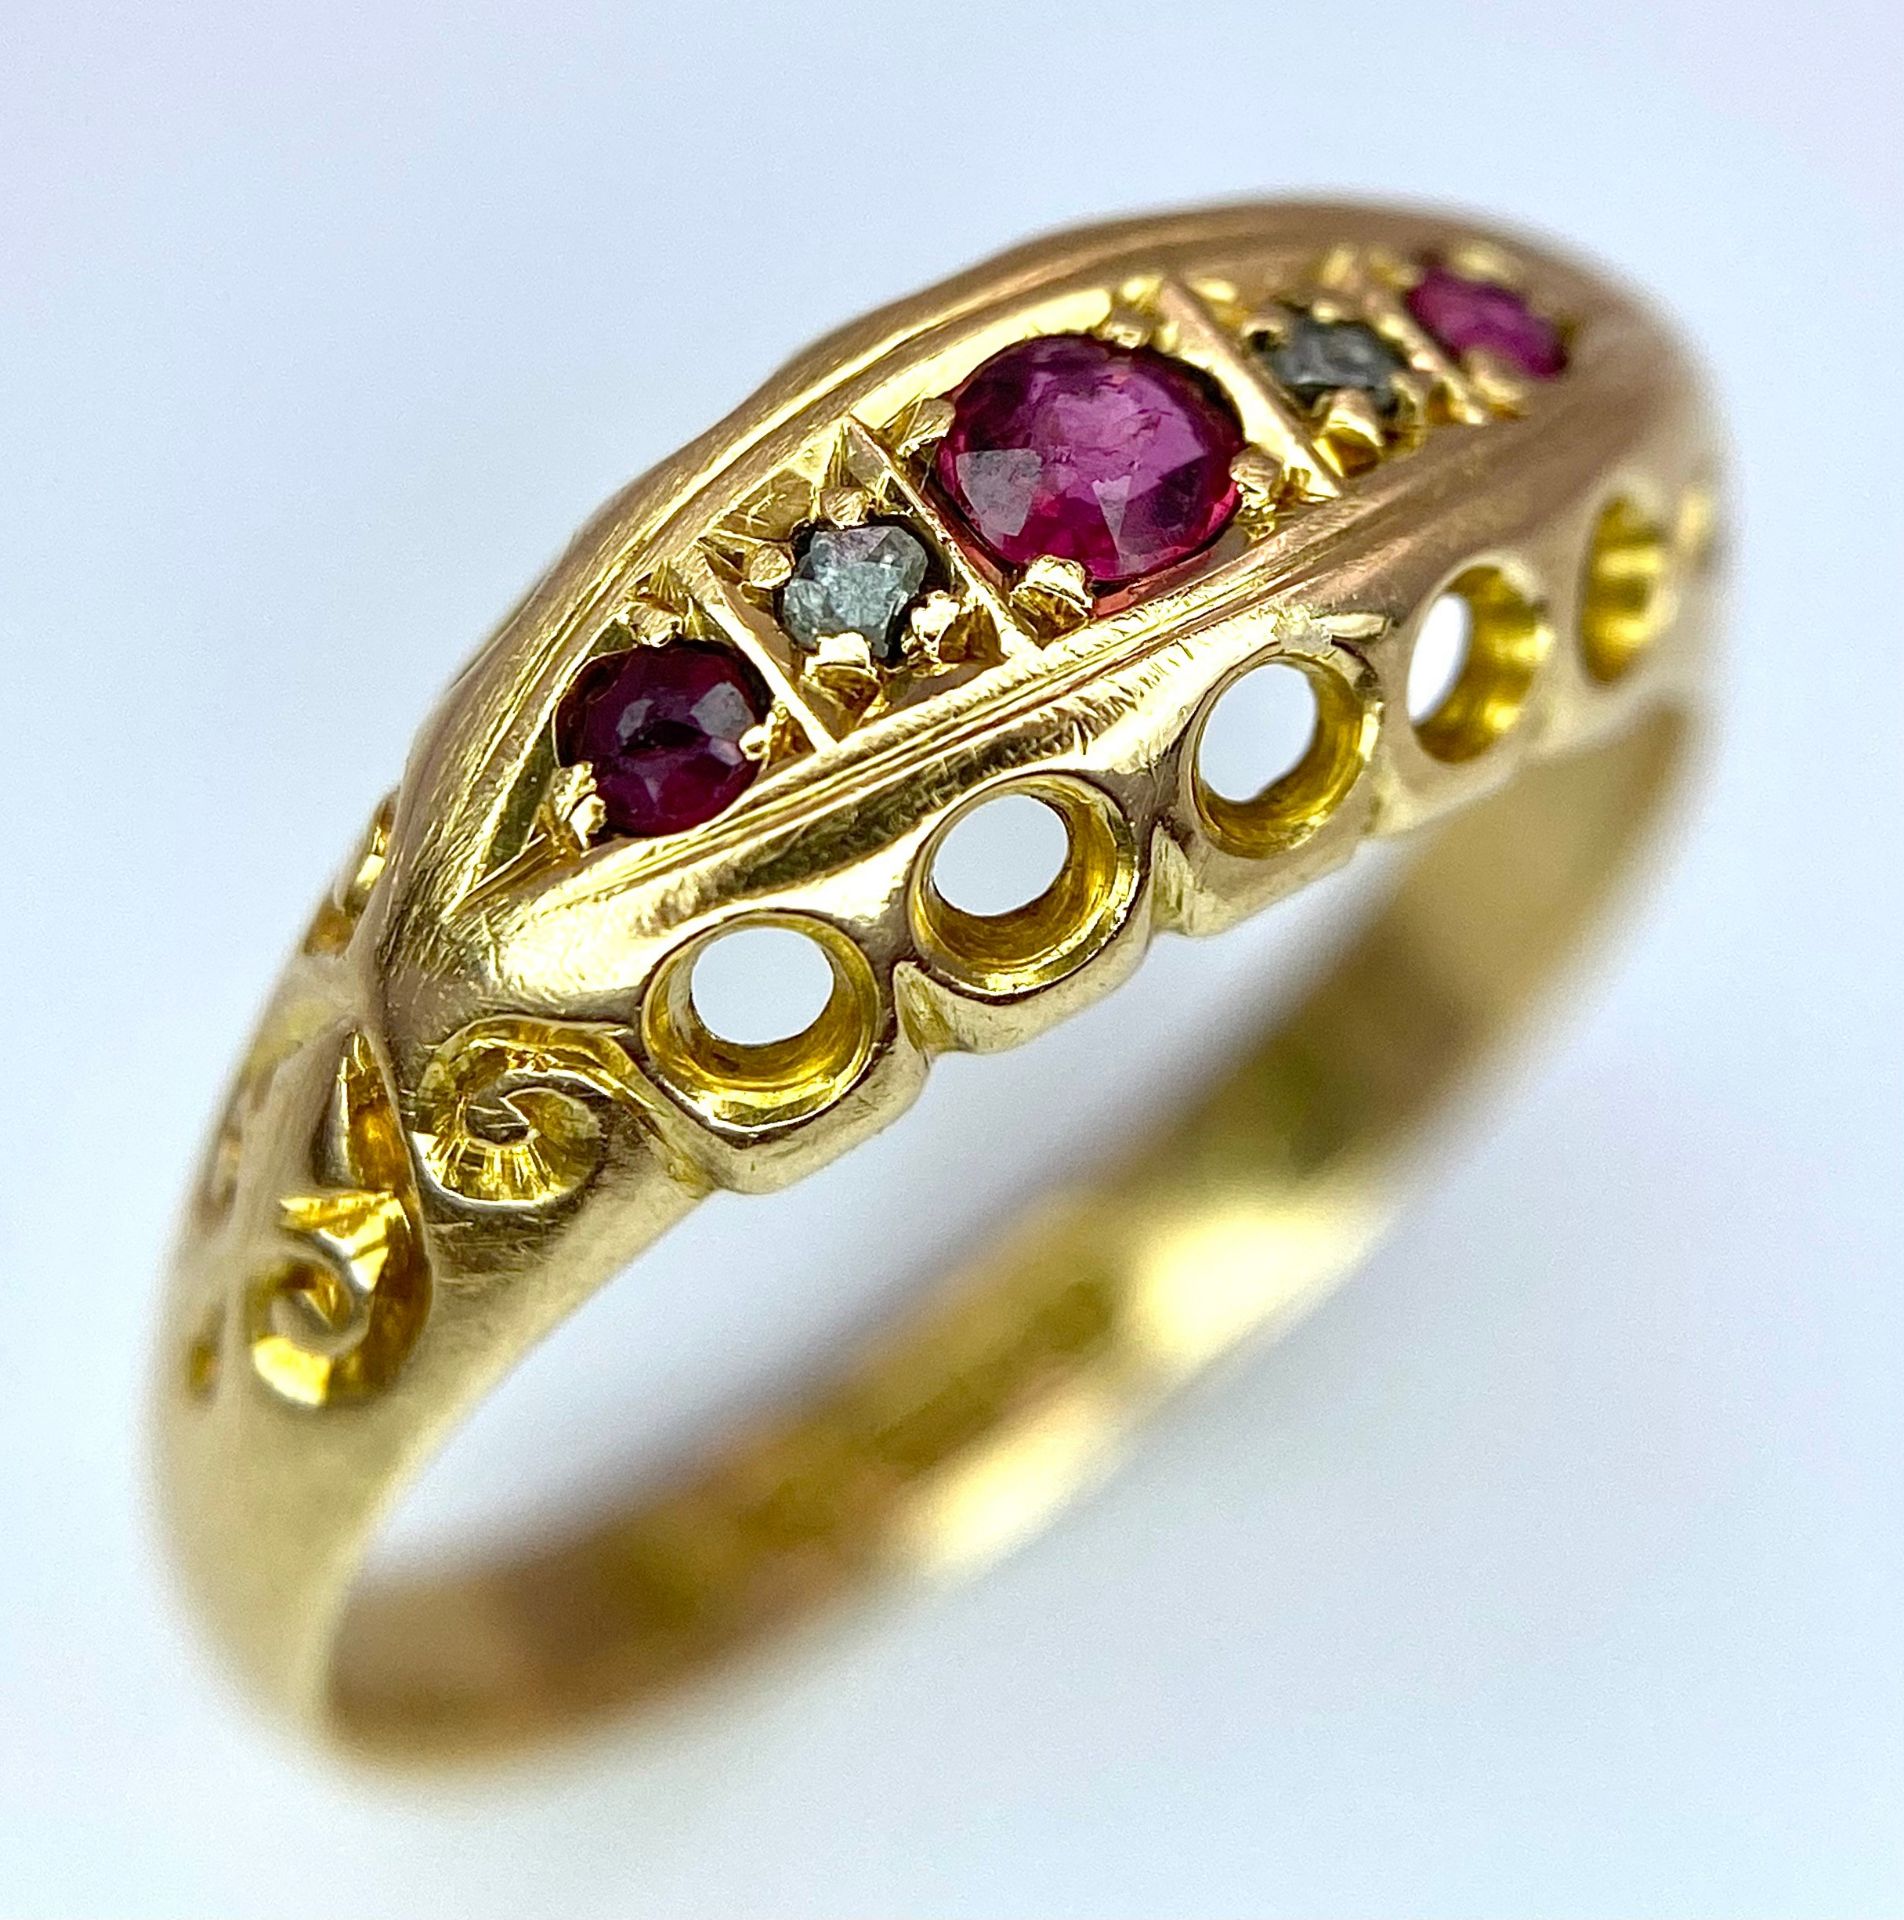 A 18K YELLOW GOLD ANTIQUE DIAMOND & RUBY RING 2.3G SIZE L HALLMARKED CHESTER 1729 A/S 1040 - 2 - Image 2 of 6